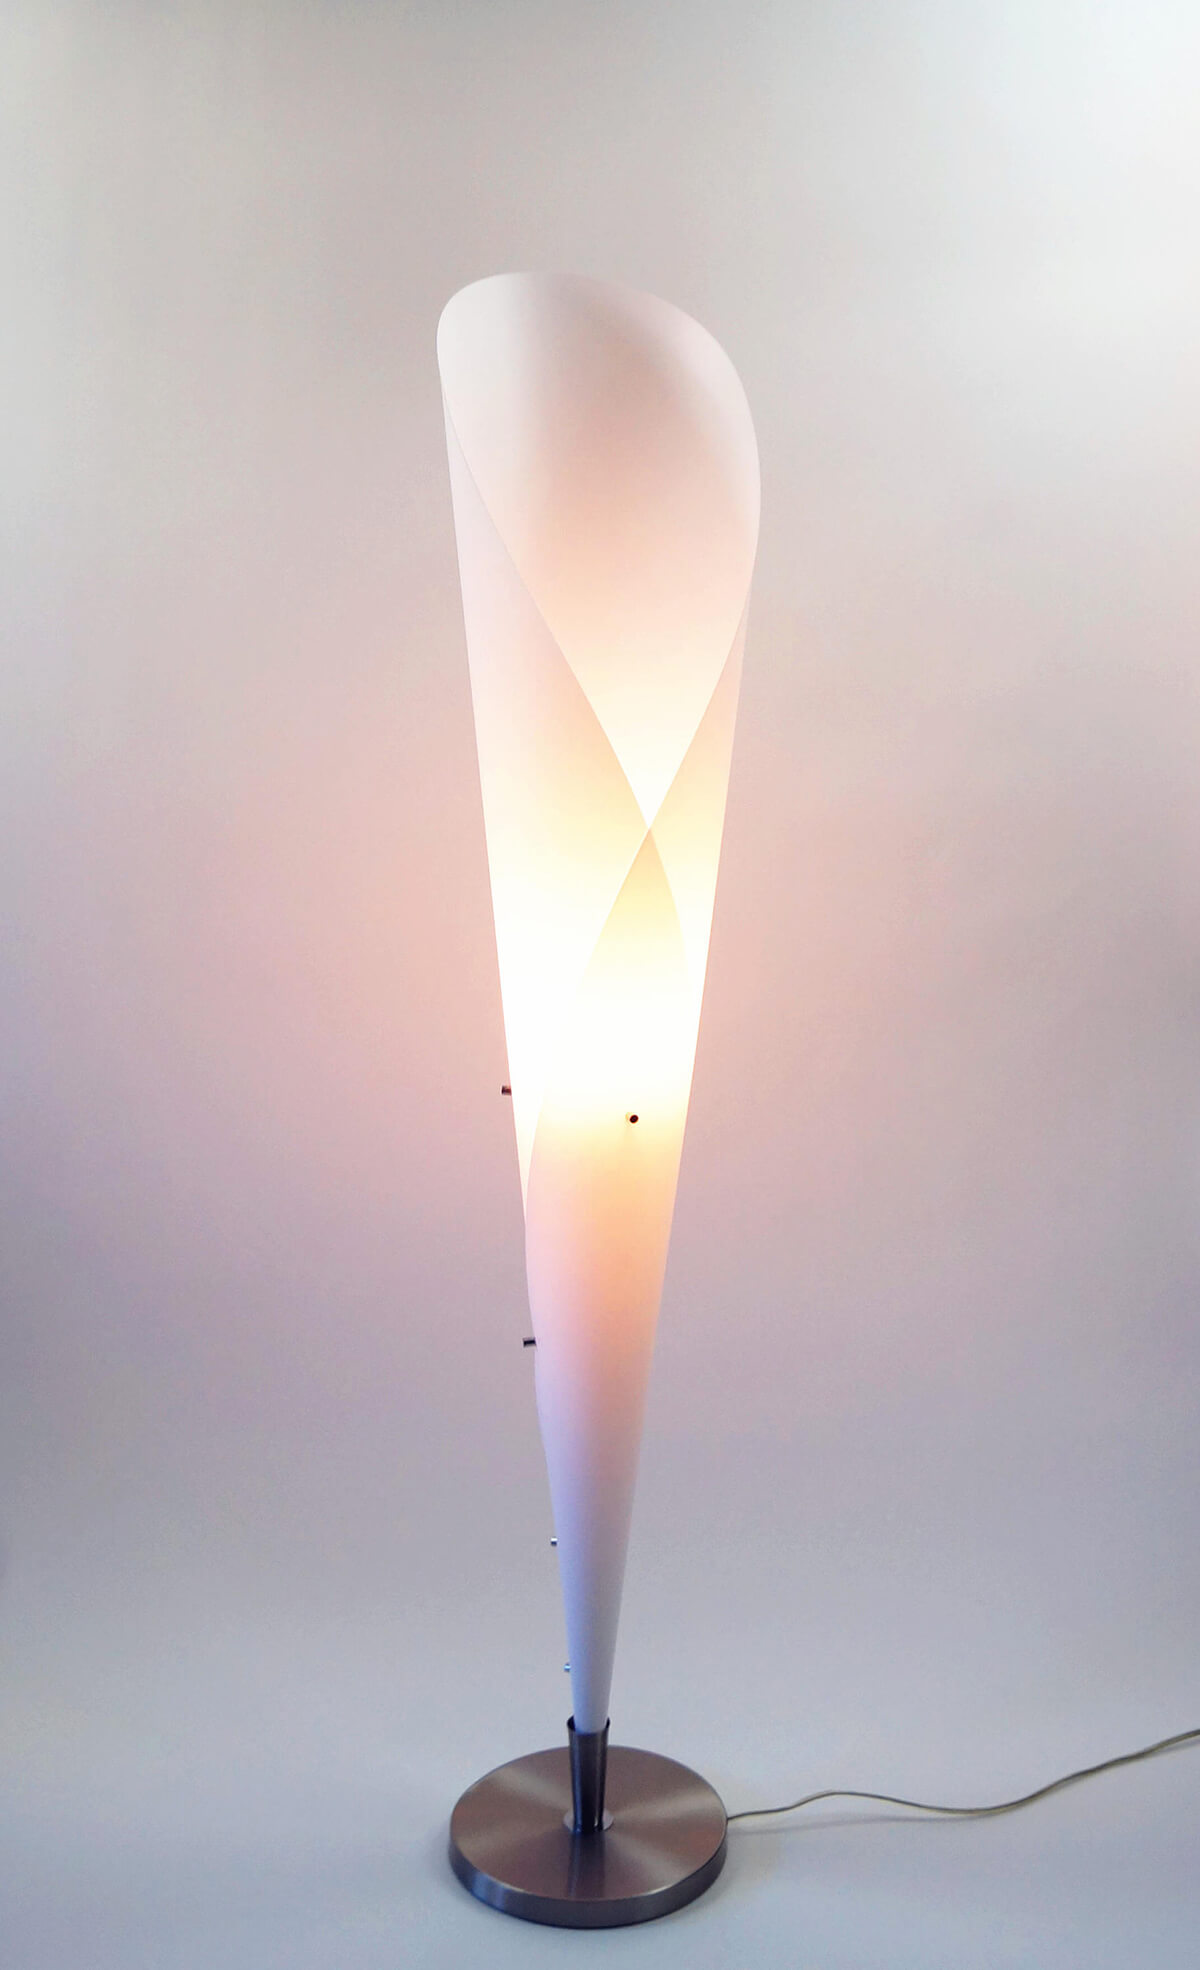 Exquisite Modern Lamp with Tall Petal-Like Lampshade